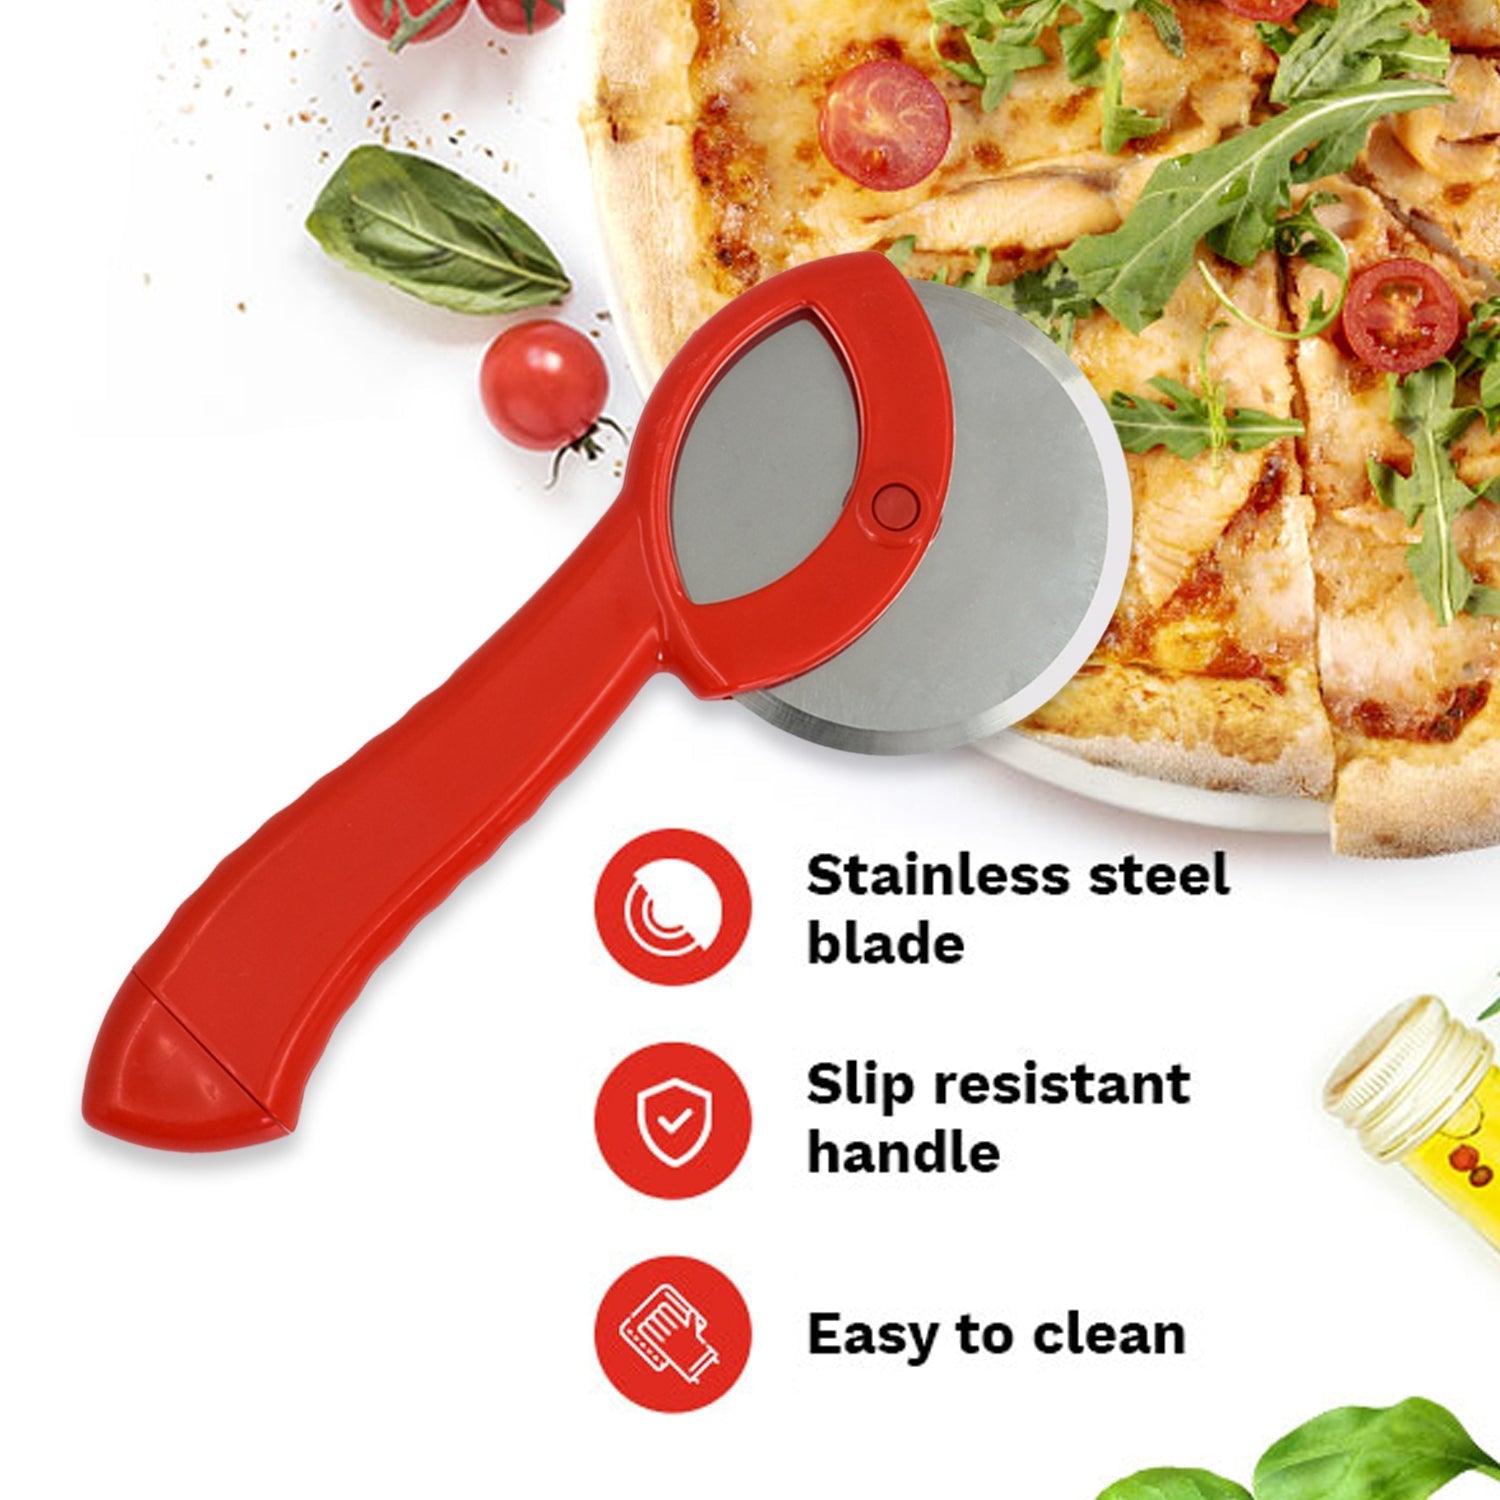 0898 Pizza Handled Cutter Used for Cutting Pizza Into Types Of Pieces Easily. freeshipping - DeoDap